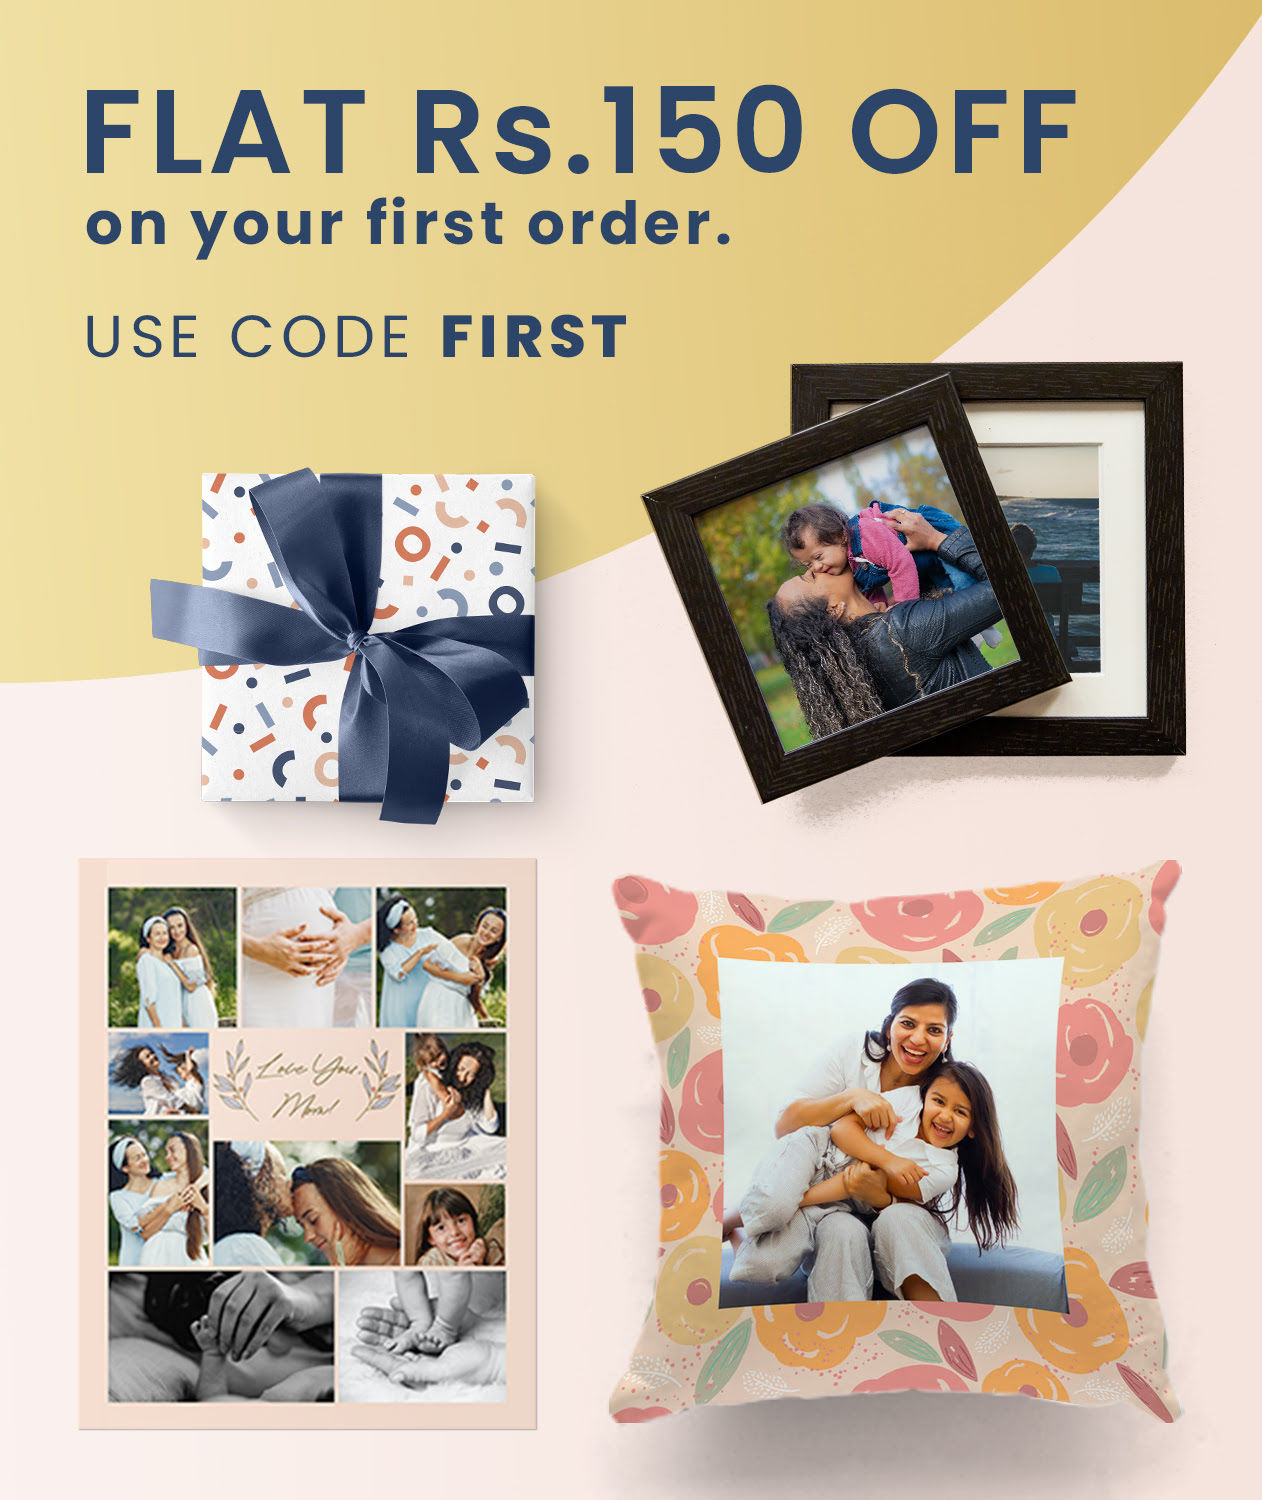 Zoomin new user offer coupon code - Flat Rs.150 Off on first order | Zoomin